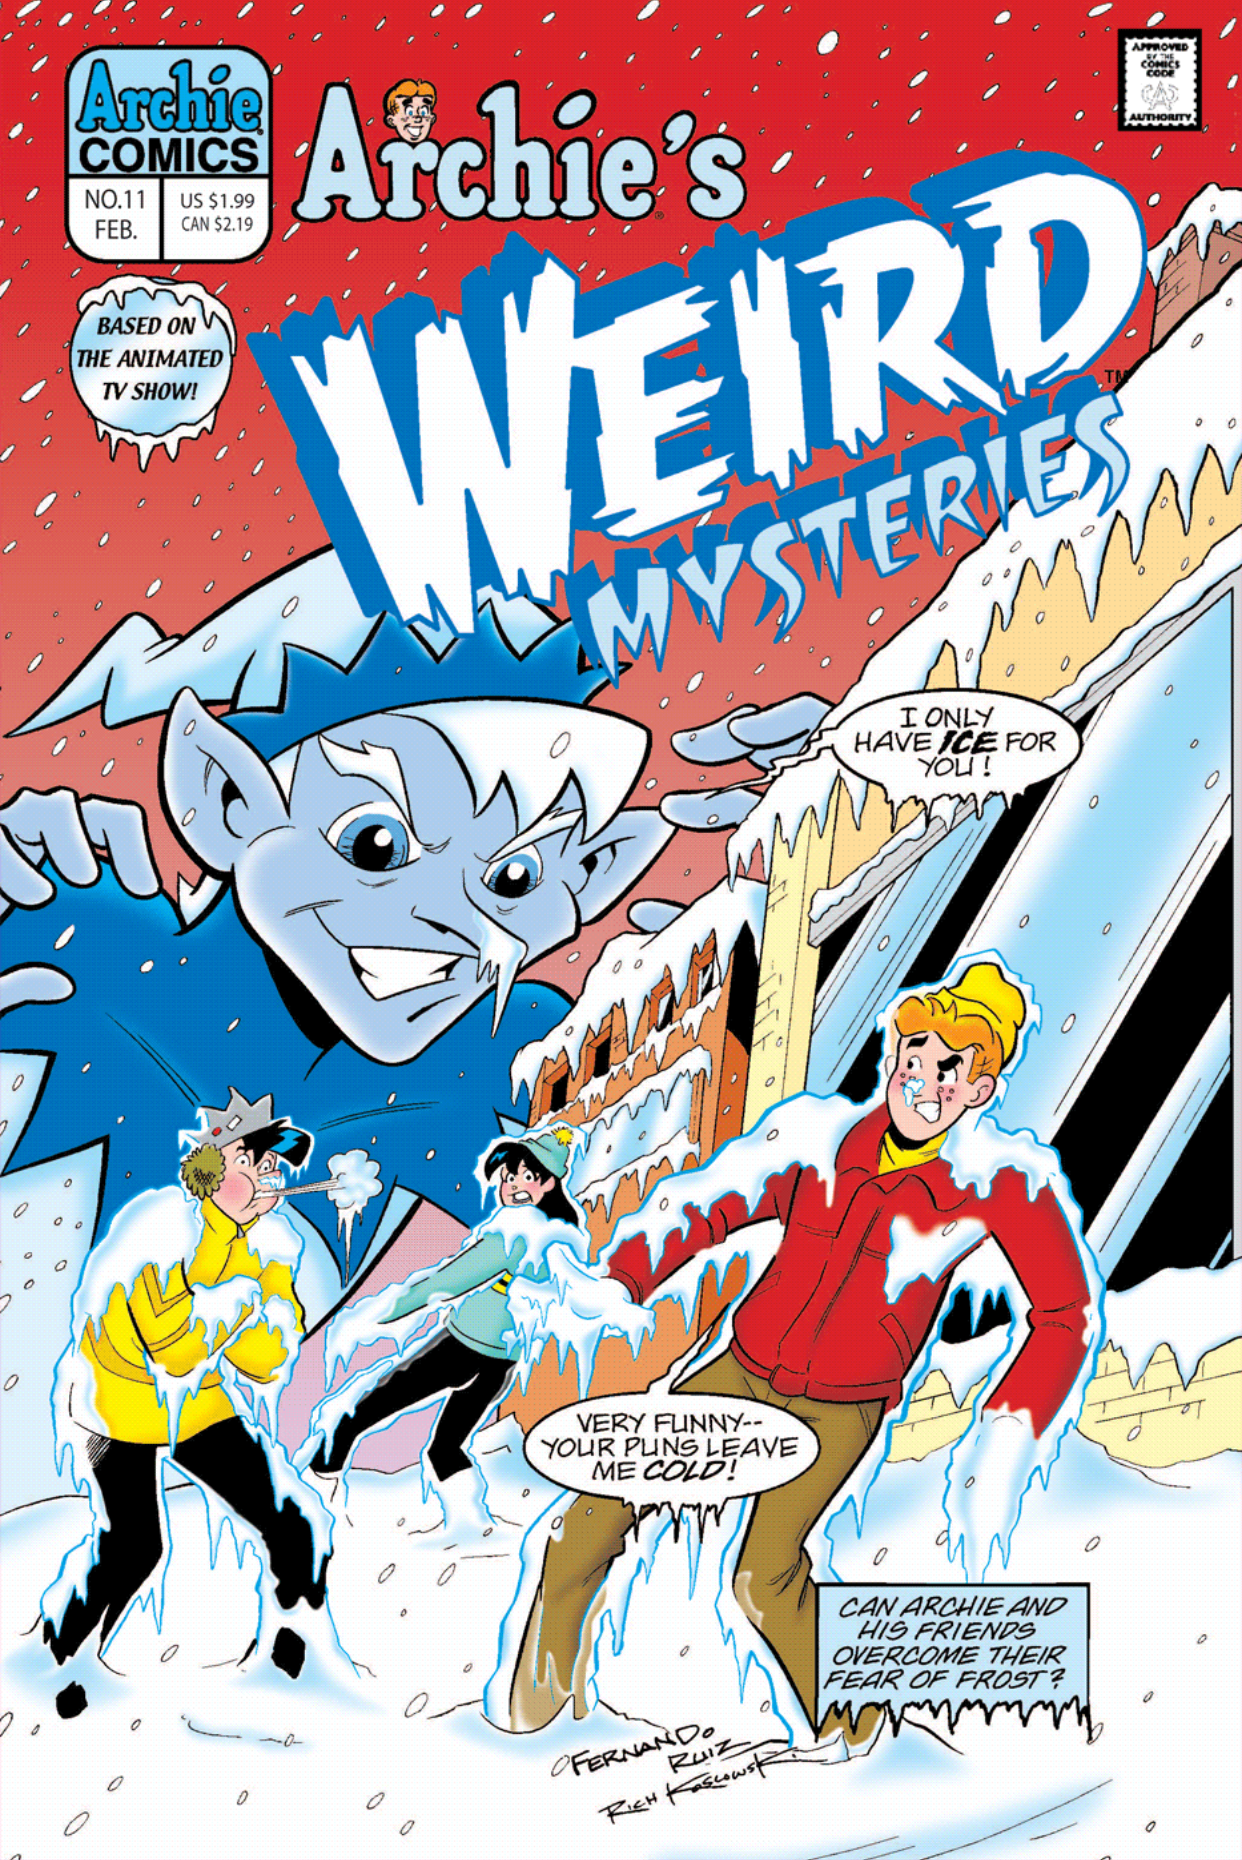 Read online Archie's Weird Mysteries comic -  Issue #11 - 1